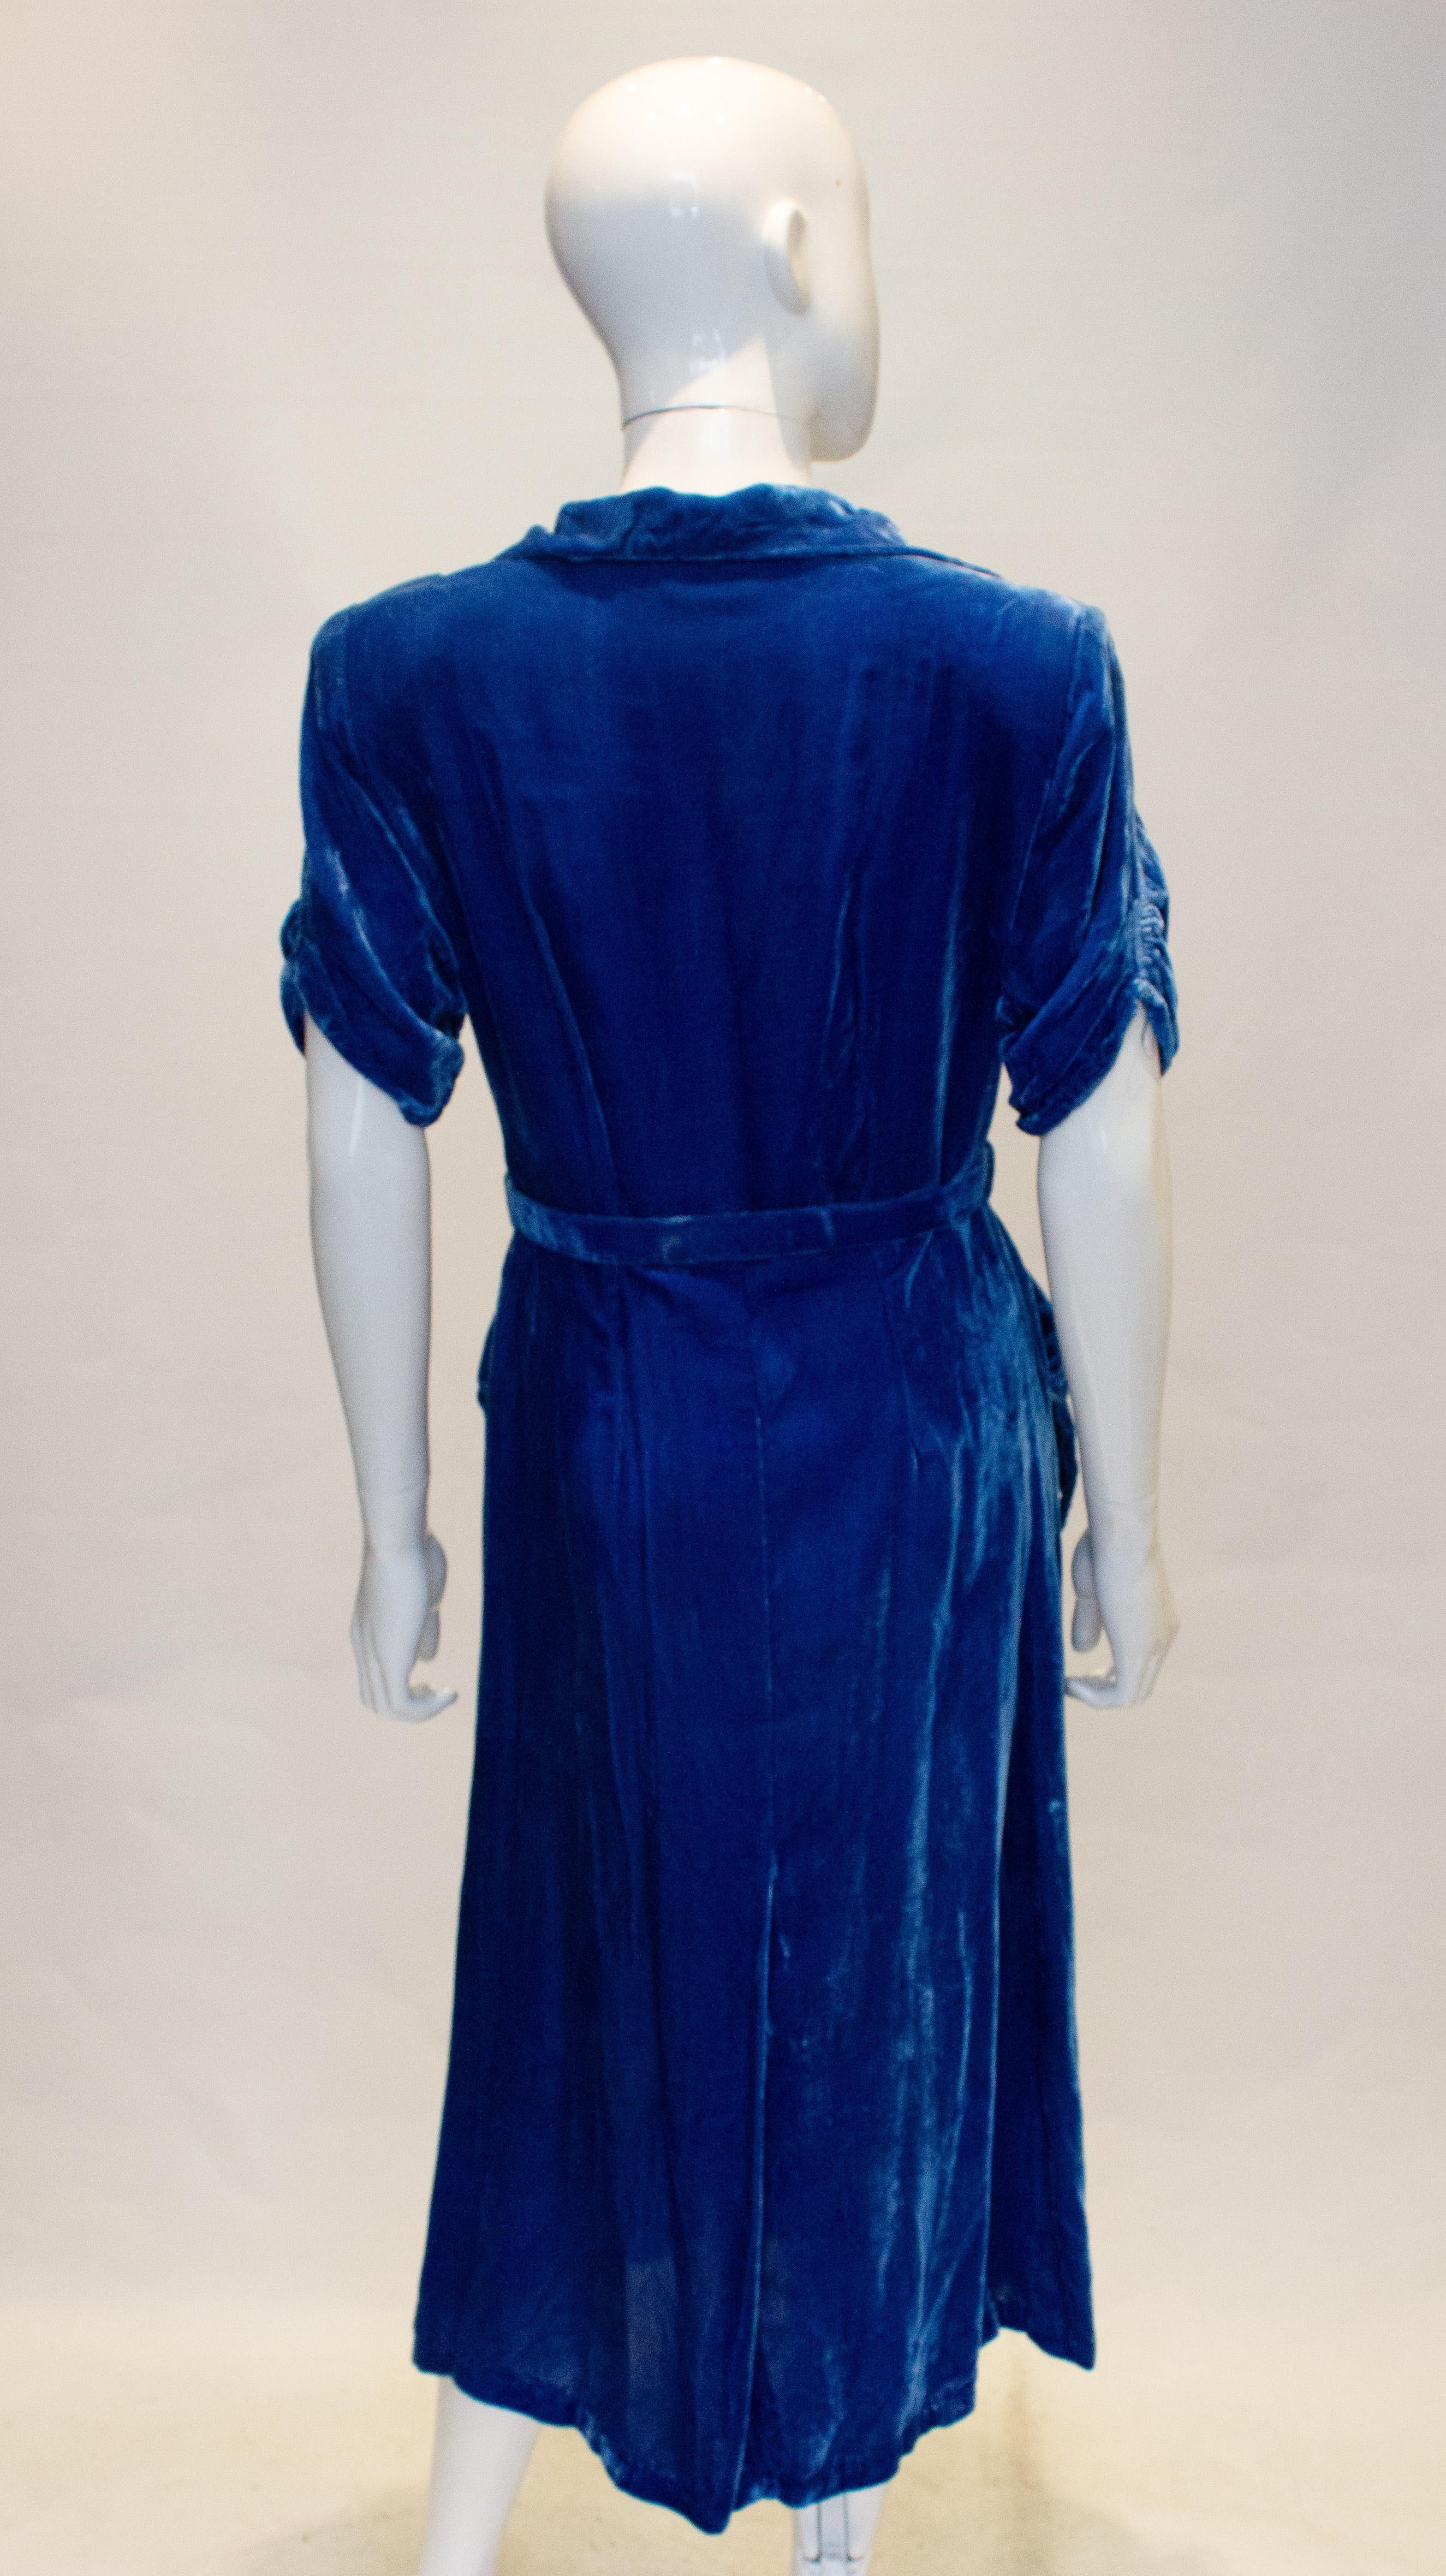 Vintage Peter Robinson Sky Blue Velvet Dress In Good Condition For Sale In London, GB